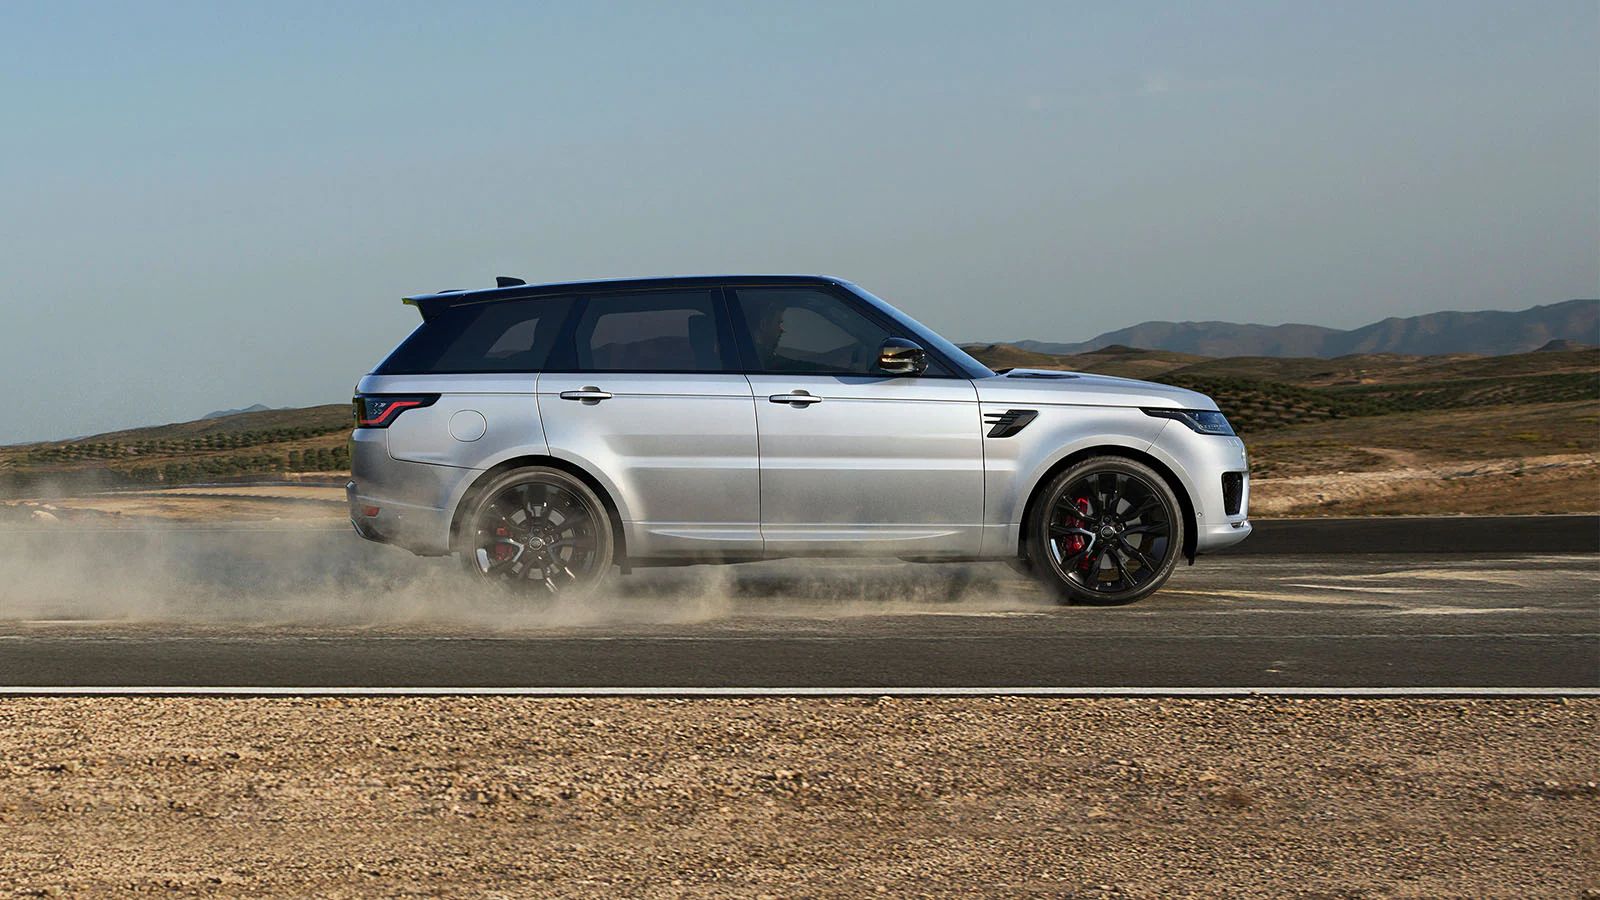 Silver Range Rover Sport side driving down dirt road